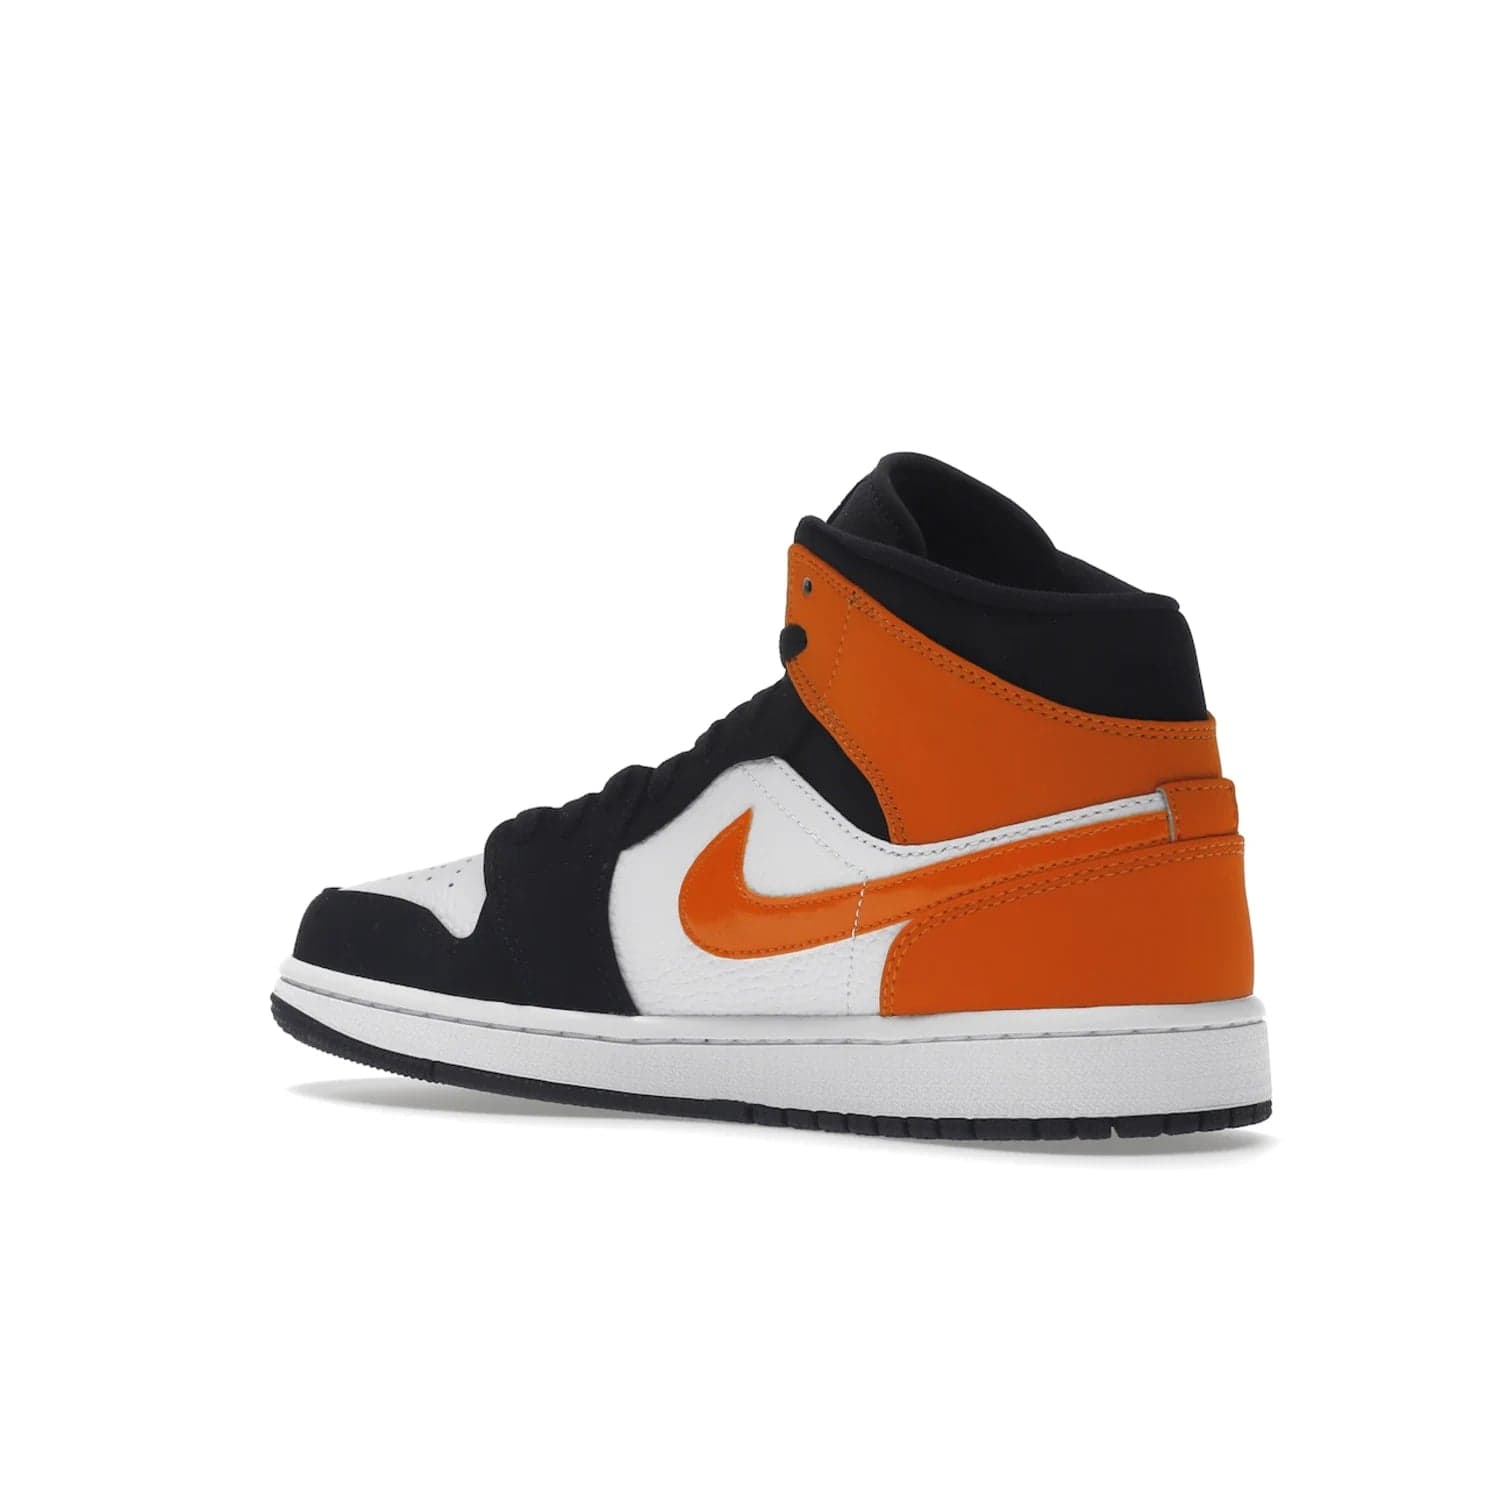 Jordan 1 Mid Shattered Backboard - Image 23 - Only at www.BallersClubKickz.com - The Air Jordan 1 Mid Shattered Backboard offers a timeless Black/White-Starfish colorway. Classic Swoosh logo and AJ insignia plus a shatterd backboard graphic on the insole. Get your pair today!